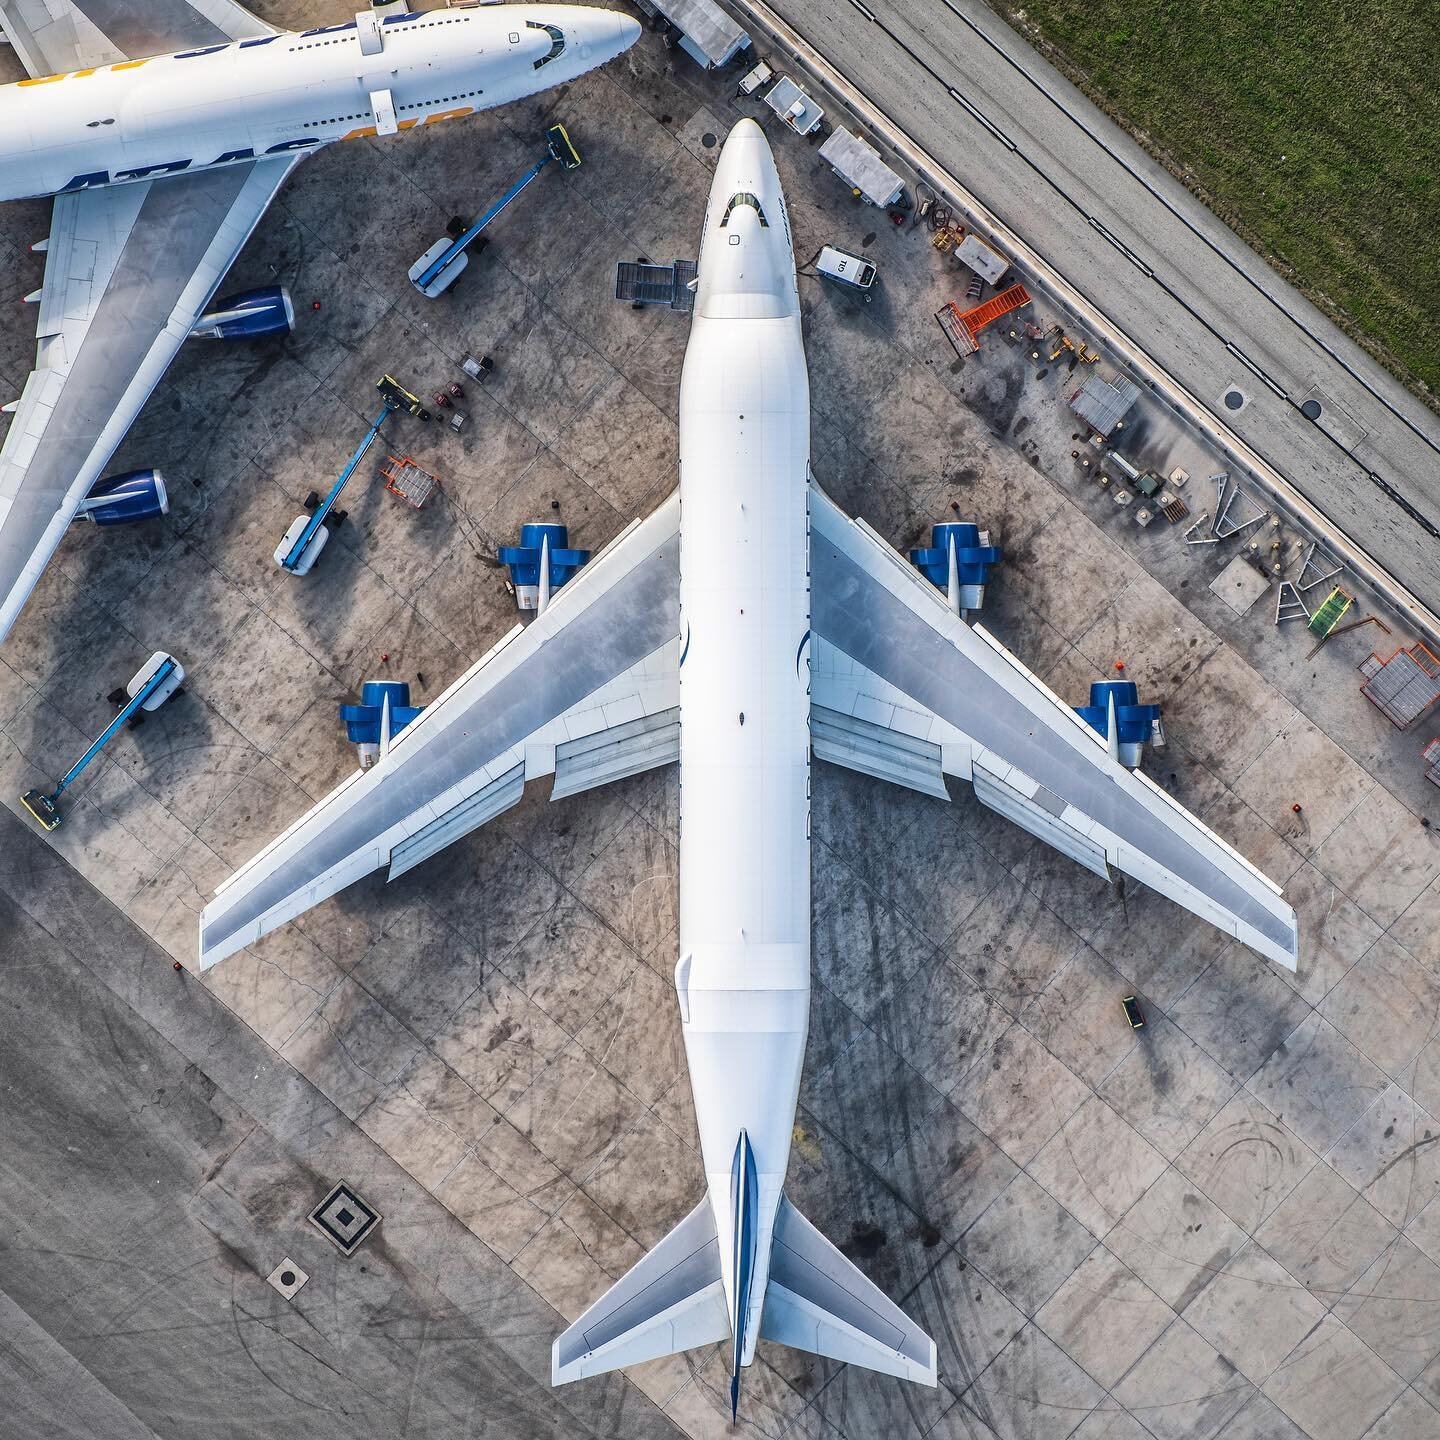 Not your average 747. This converted &ldquo;Dreamlifter&rdquo; frame was built with the purpose of hauling pieces of 787s from around the world for assembly. #dreamlifter #boeing #atlasair #boeing747  #iflymia #miamiairport #miami #a2a #aerialphotogr